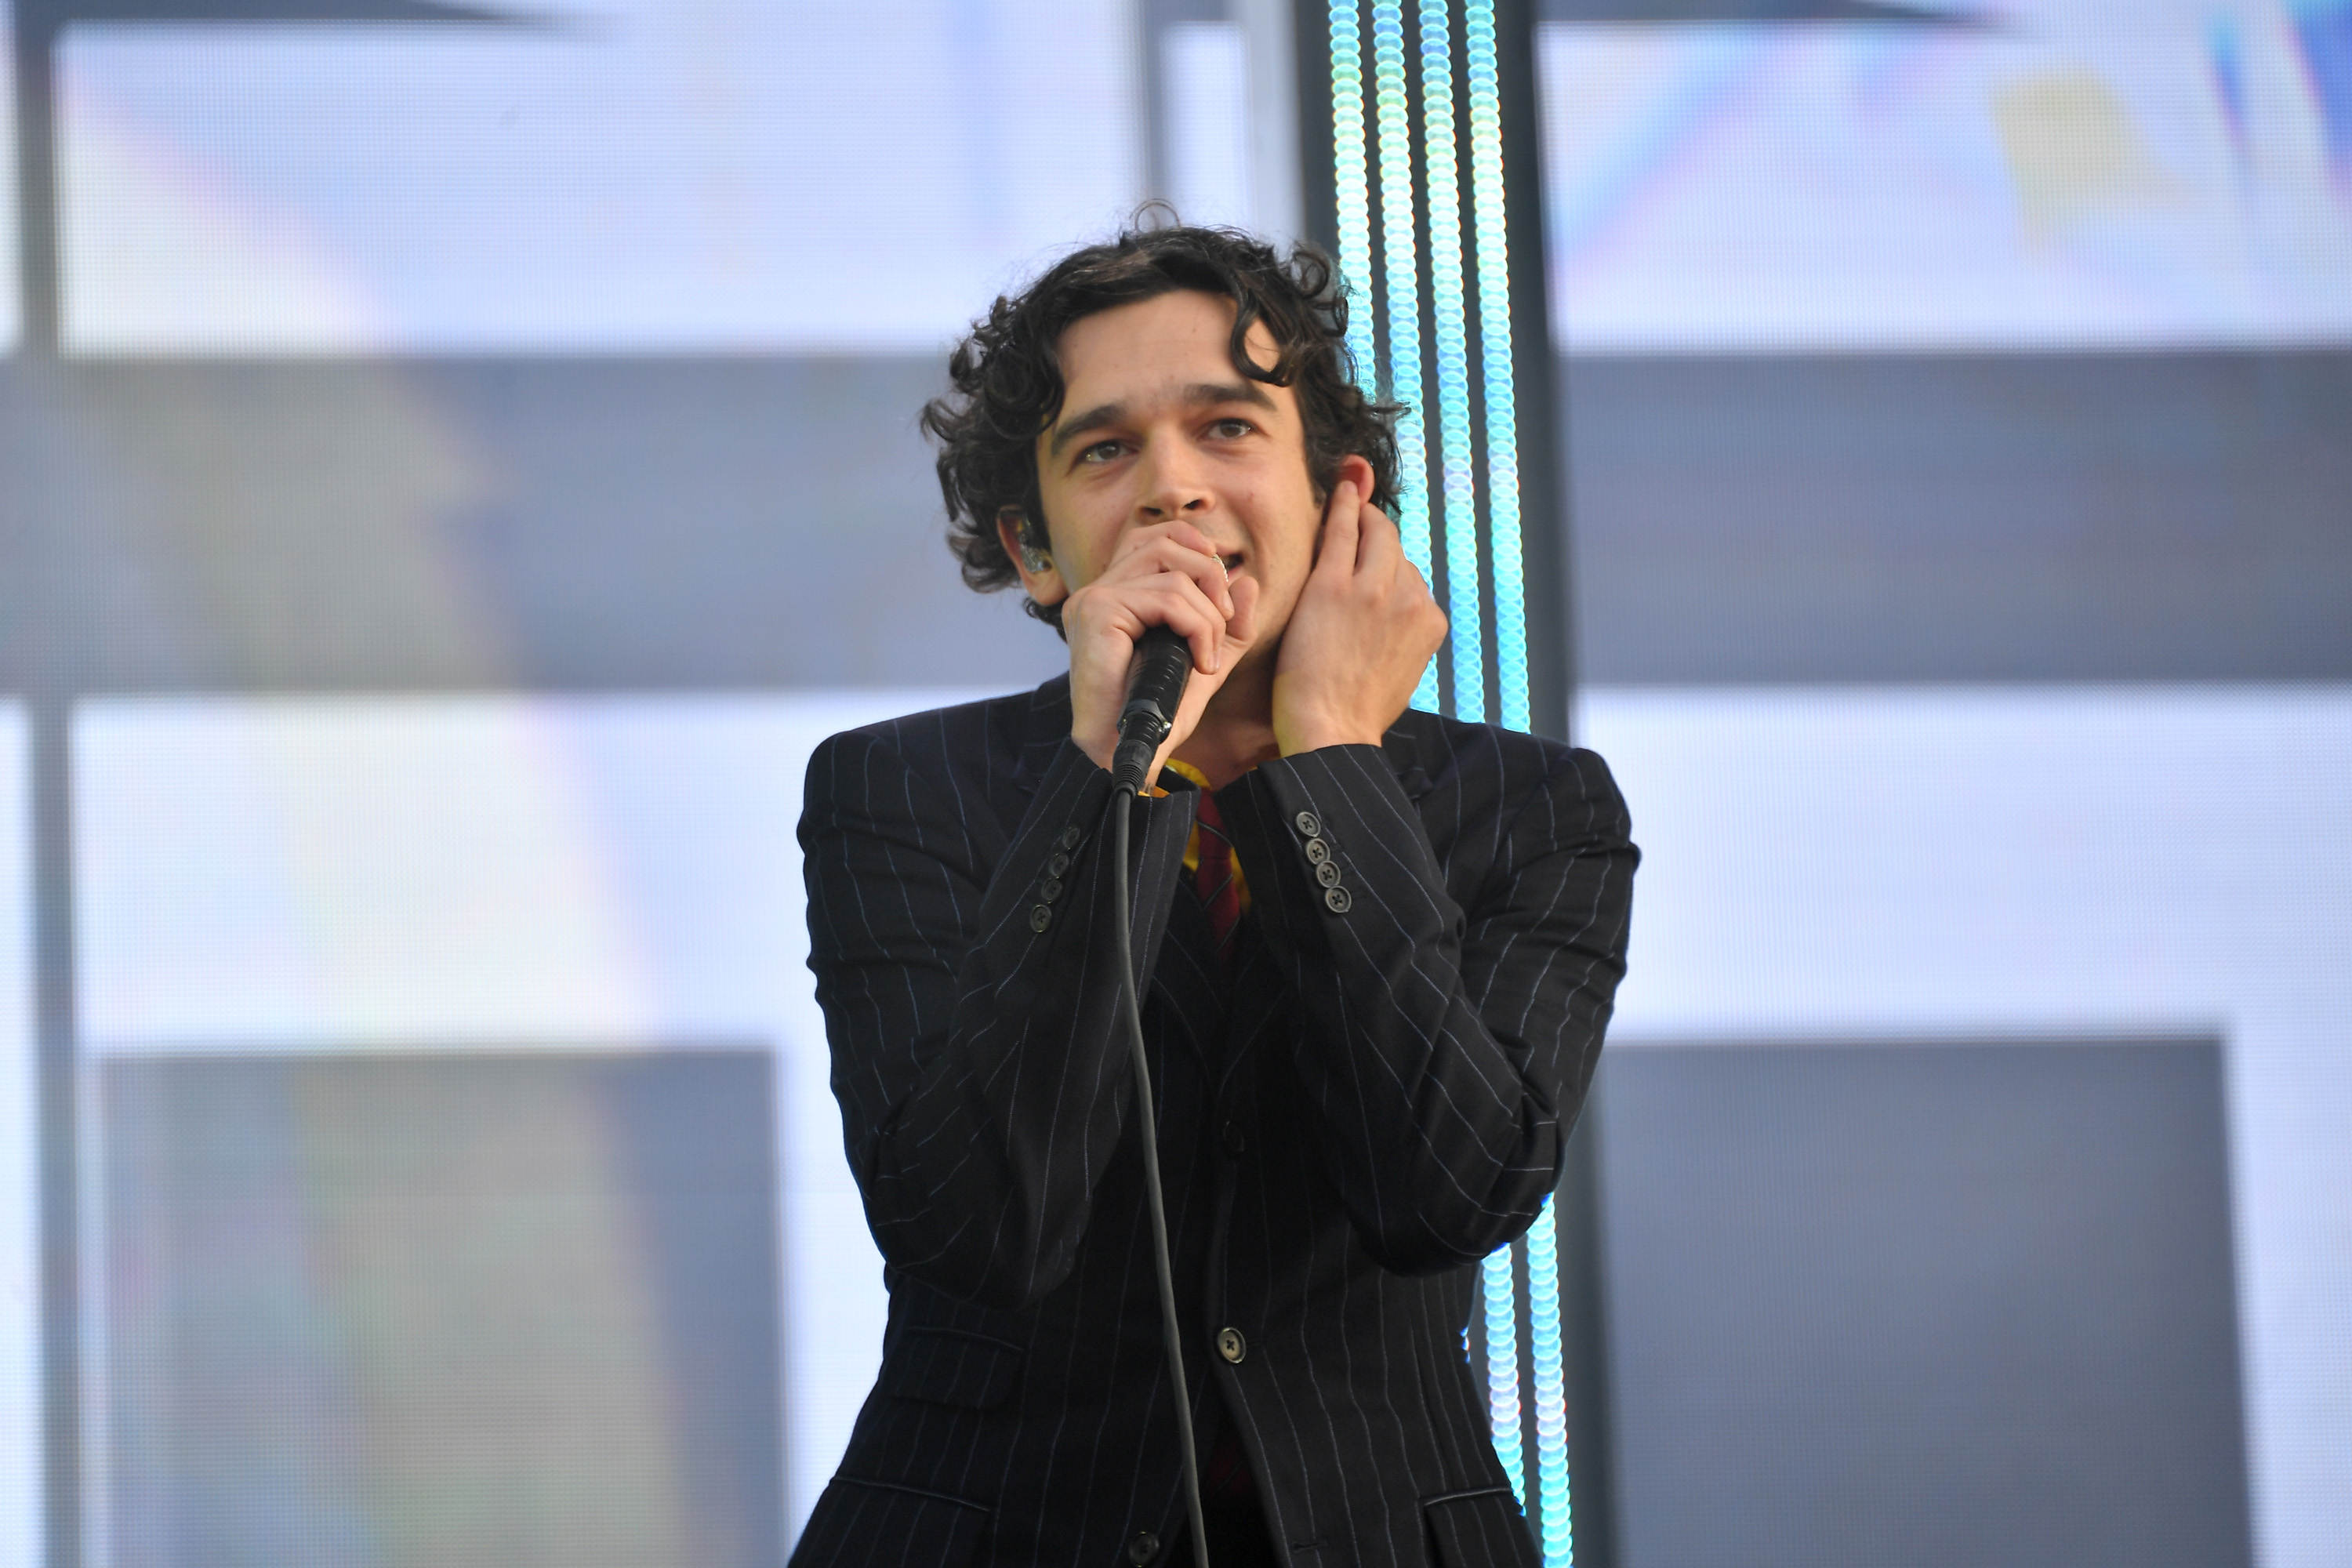 Watch The 1975 Perform <i>Being Funny</i> Tracks on <i>Saturday Night Live</i>